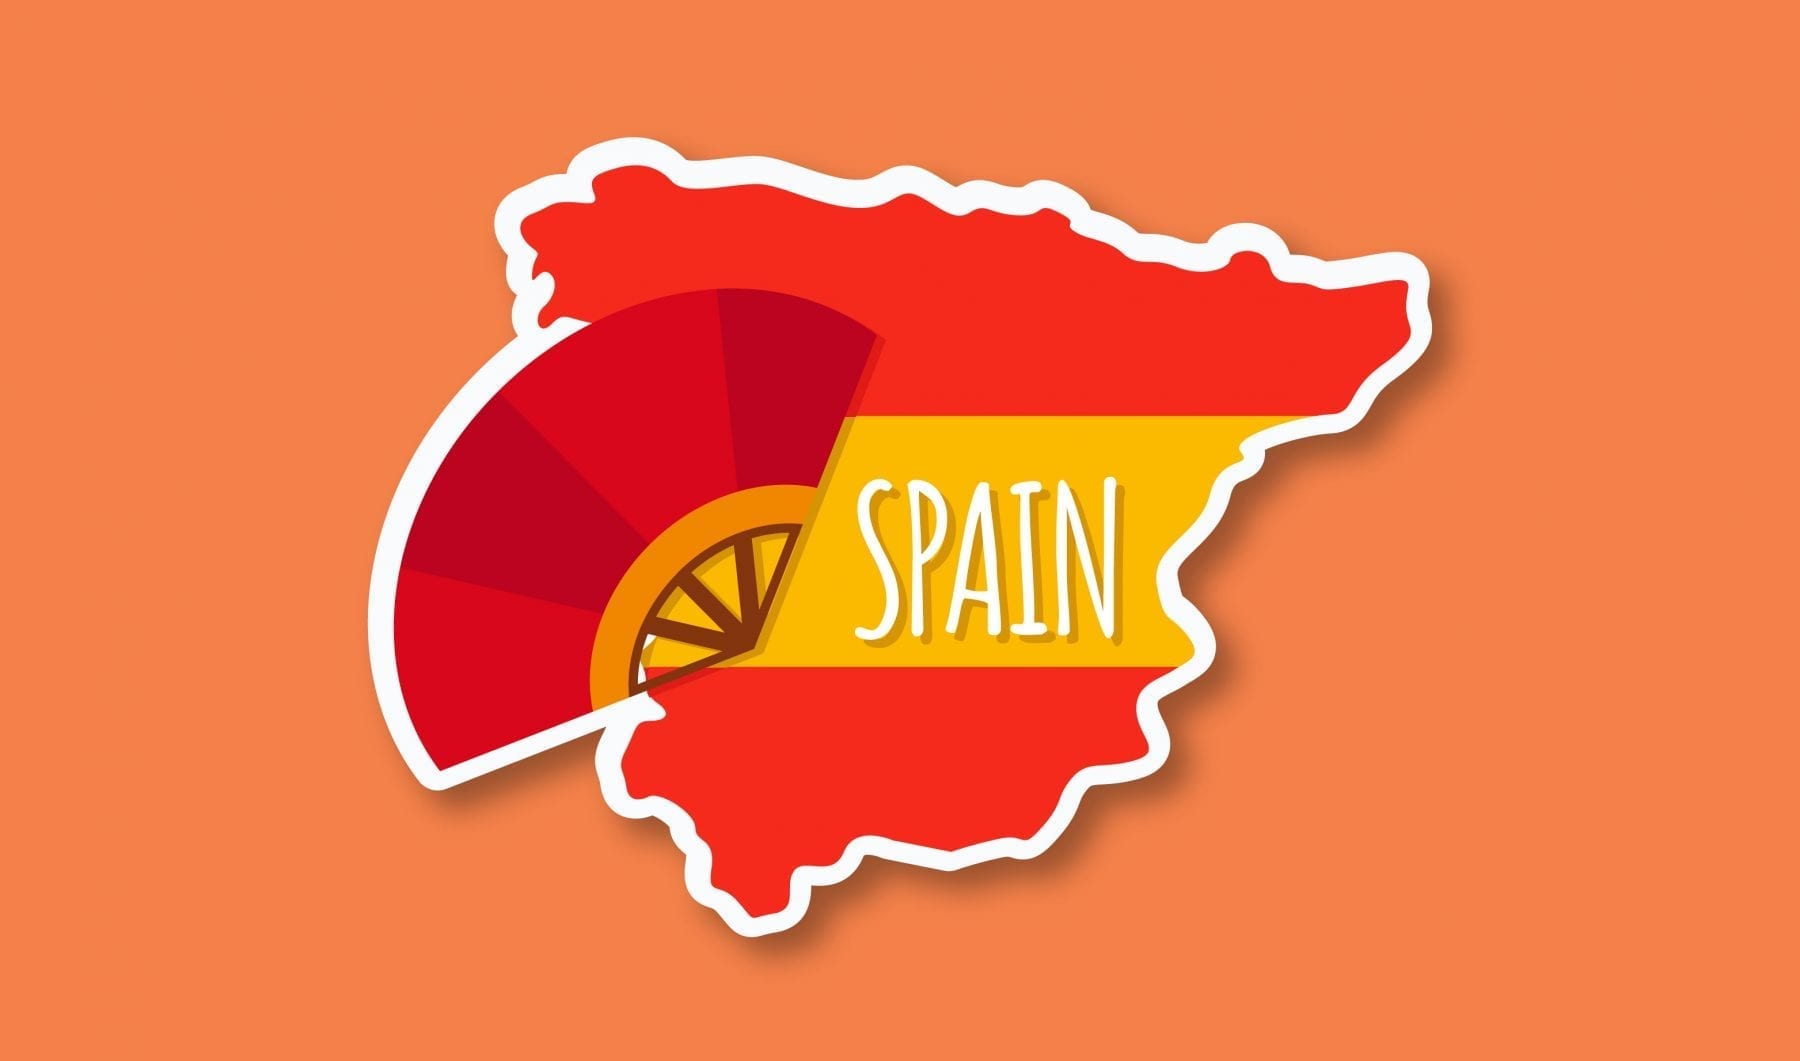 What Are the Qualities of A Good Spanish Translator